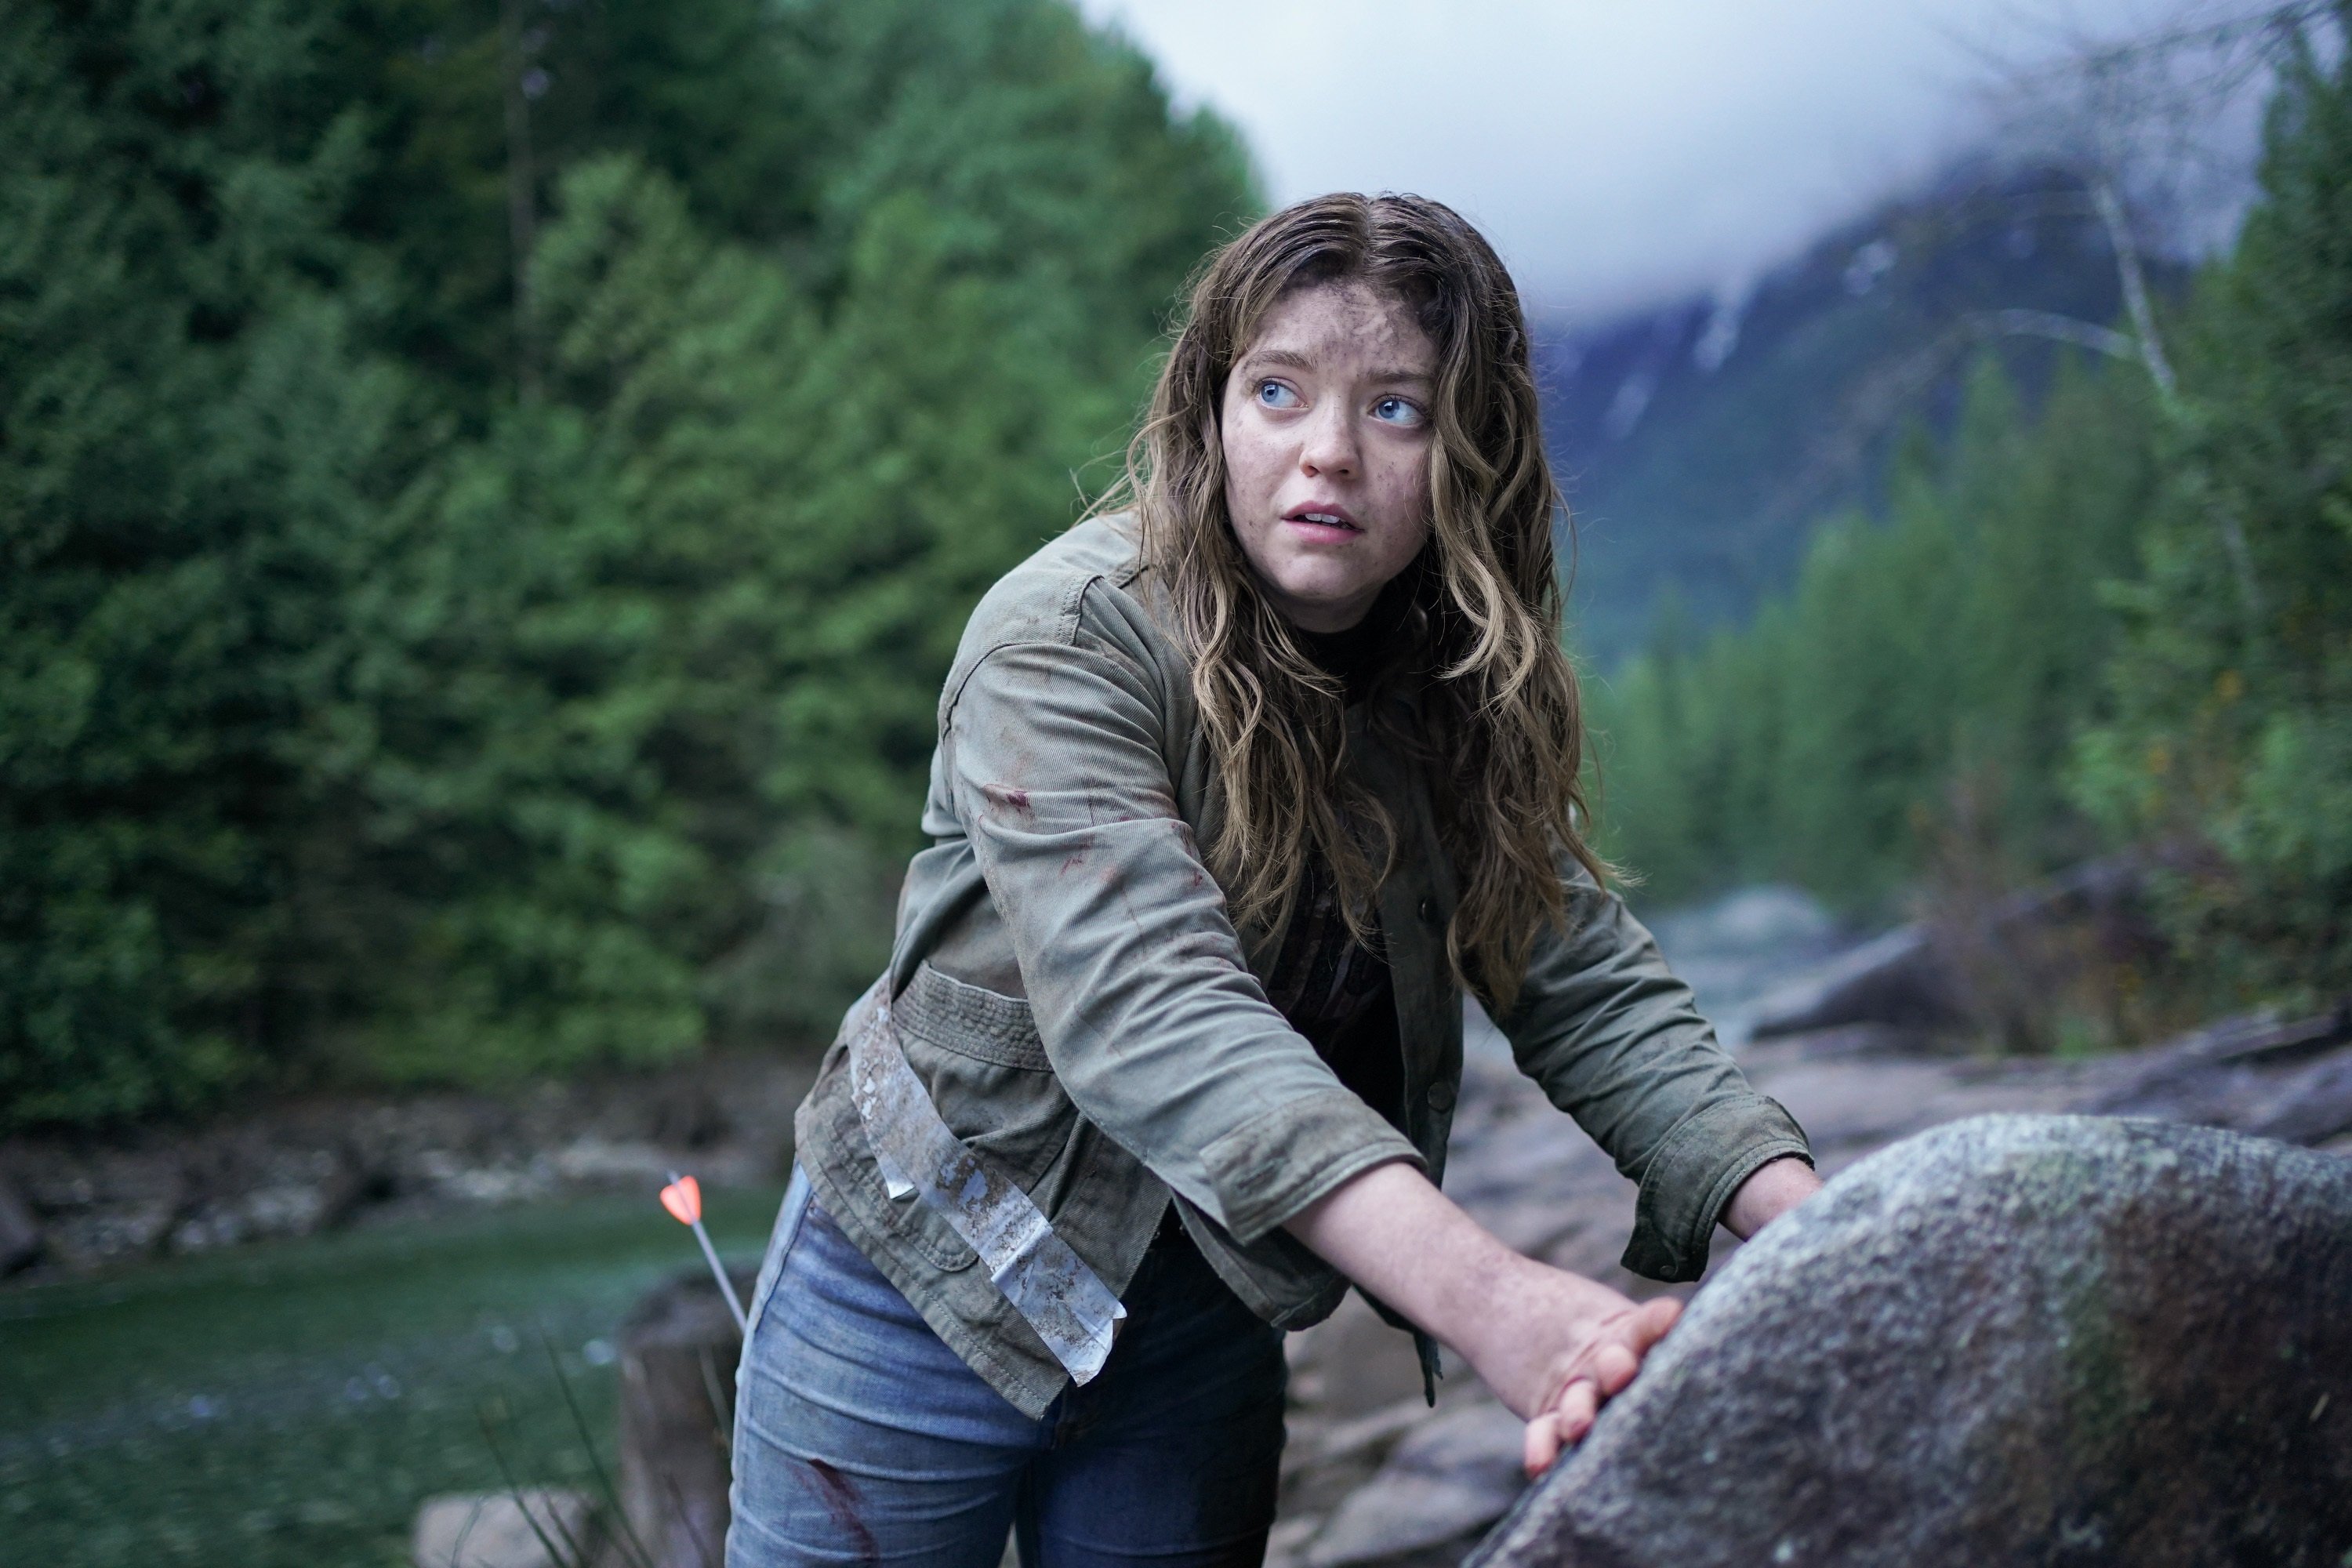 Big Sky star Jade Pettyjohn acting as Grace while filming on location